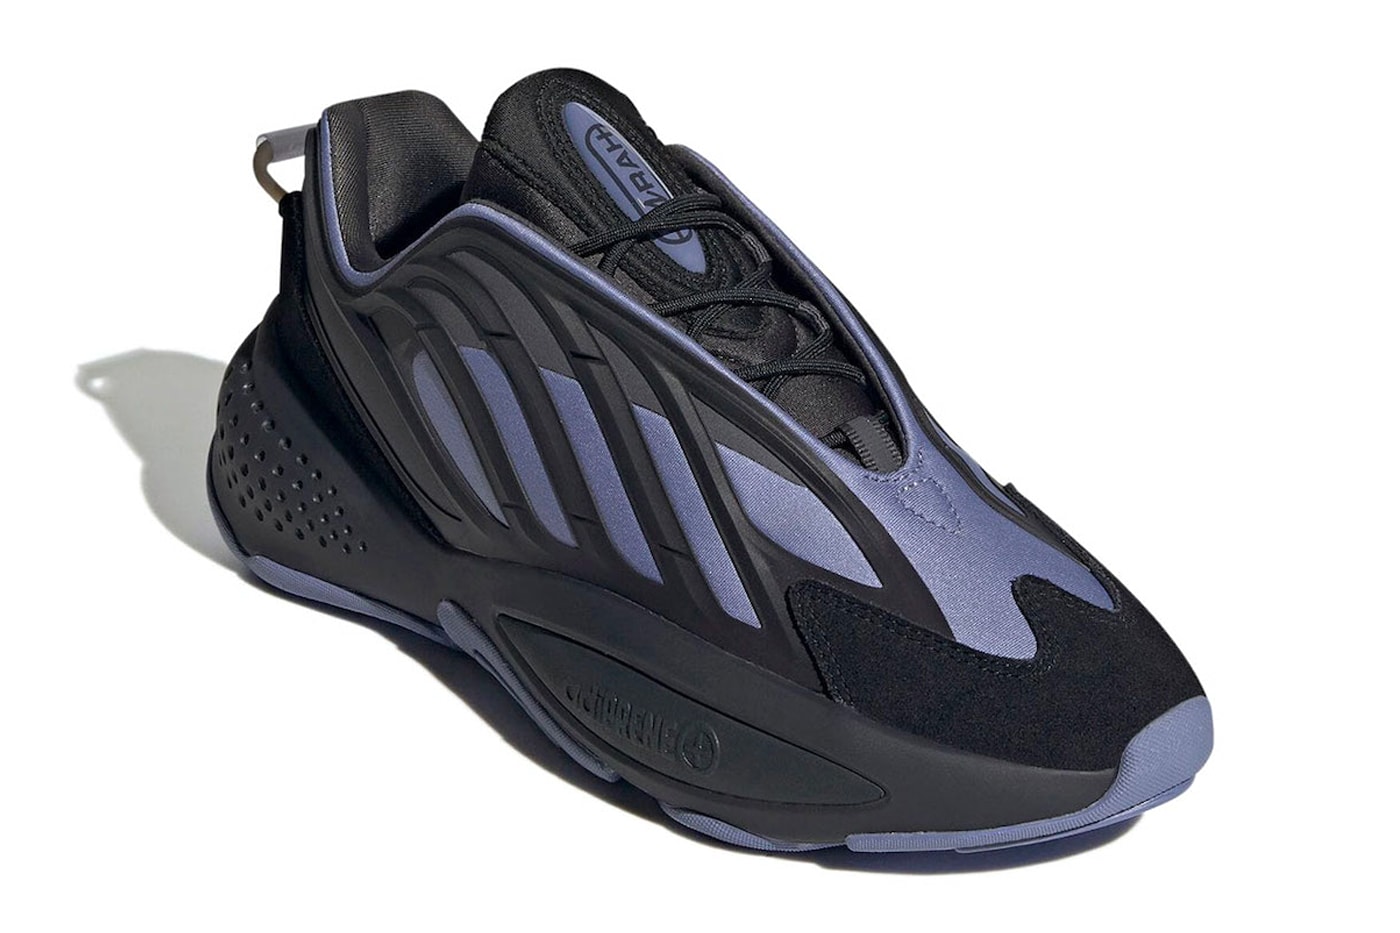 adidas Ozrah “Carbon” H04206 Release Info sneakers three stripes footwear carbon core black textile suede